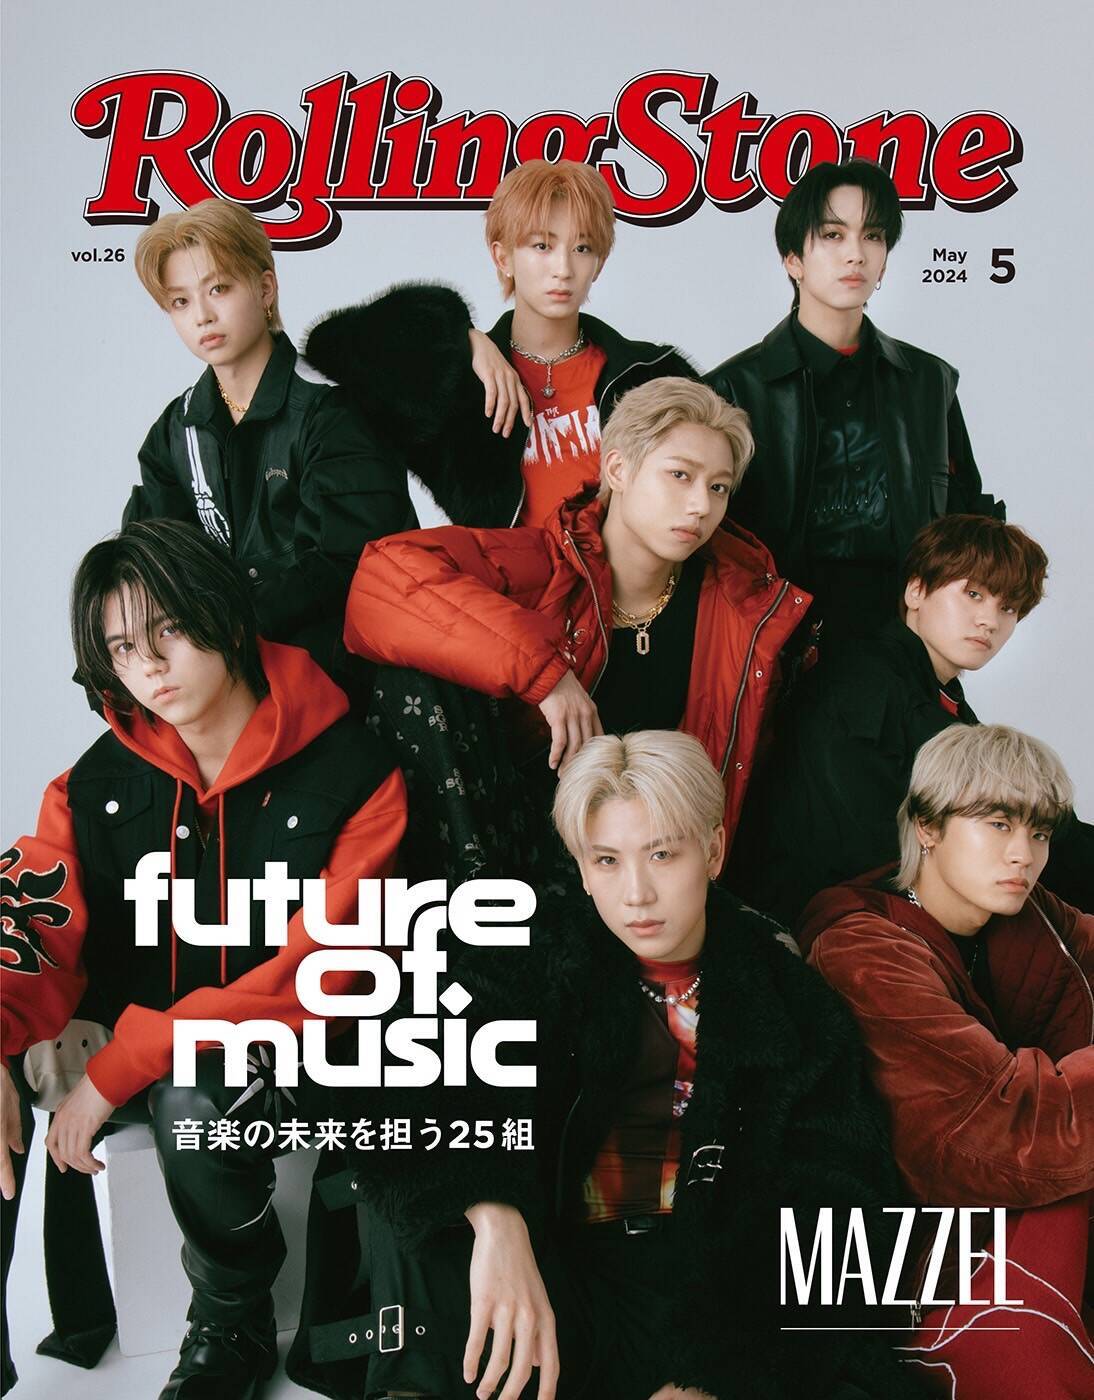 「Future of Music」日本代表25組を発表　世界各国のRolling Stone誌がアーティストを選出